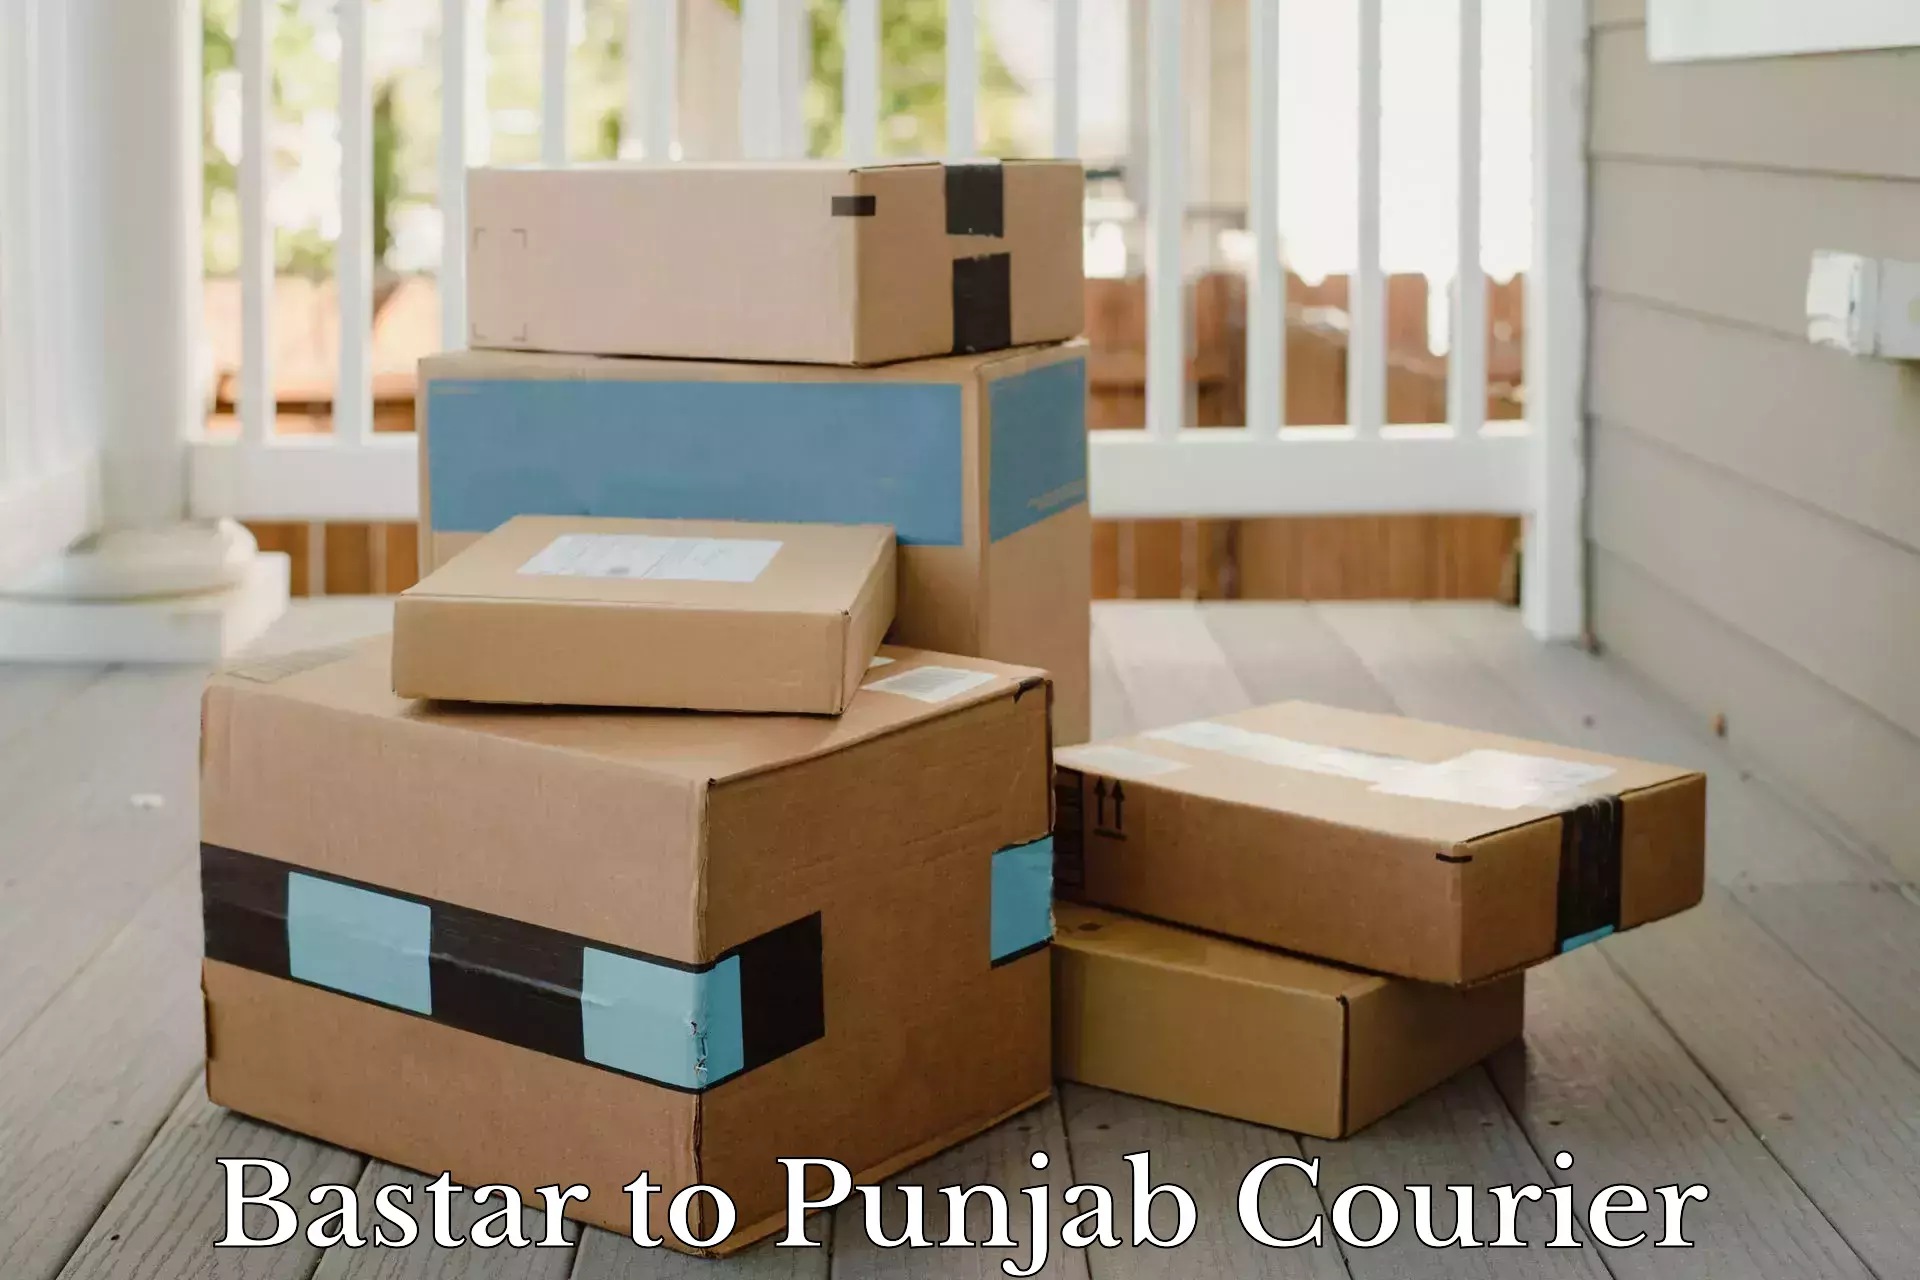 Small business couriers Bastar to Punjab